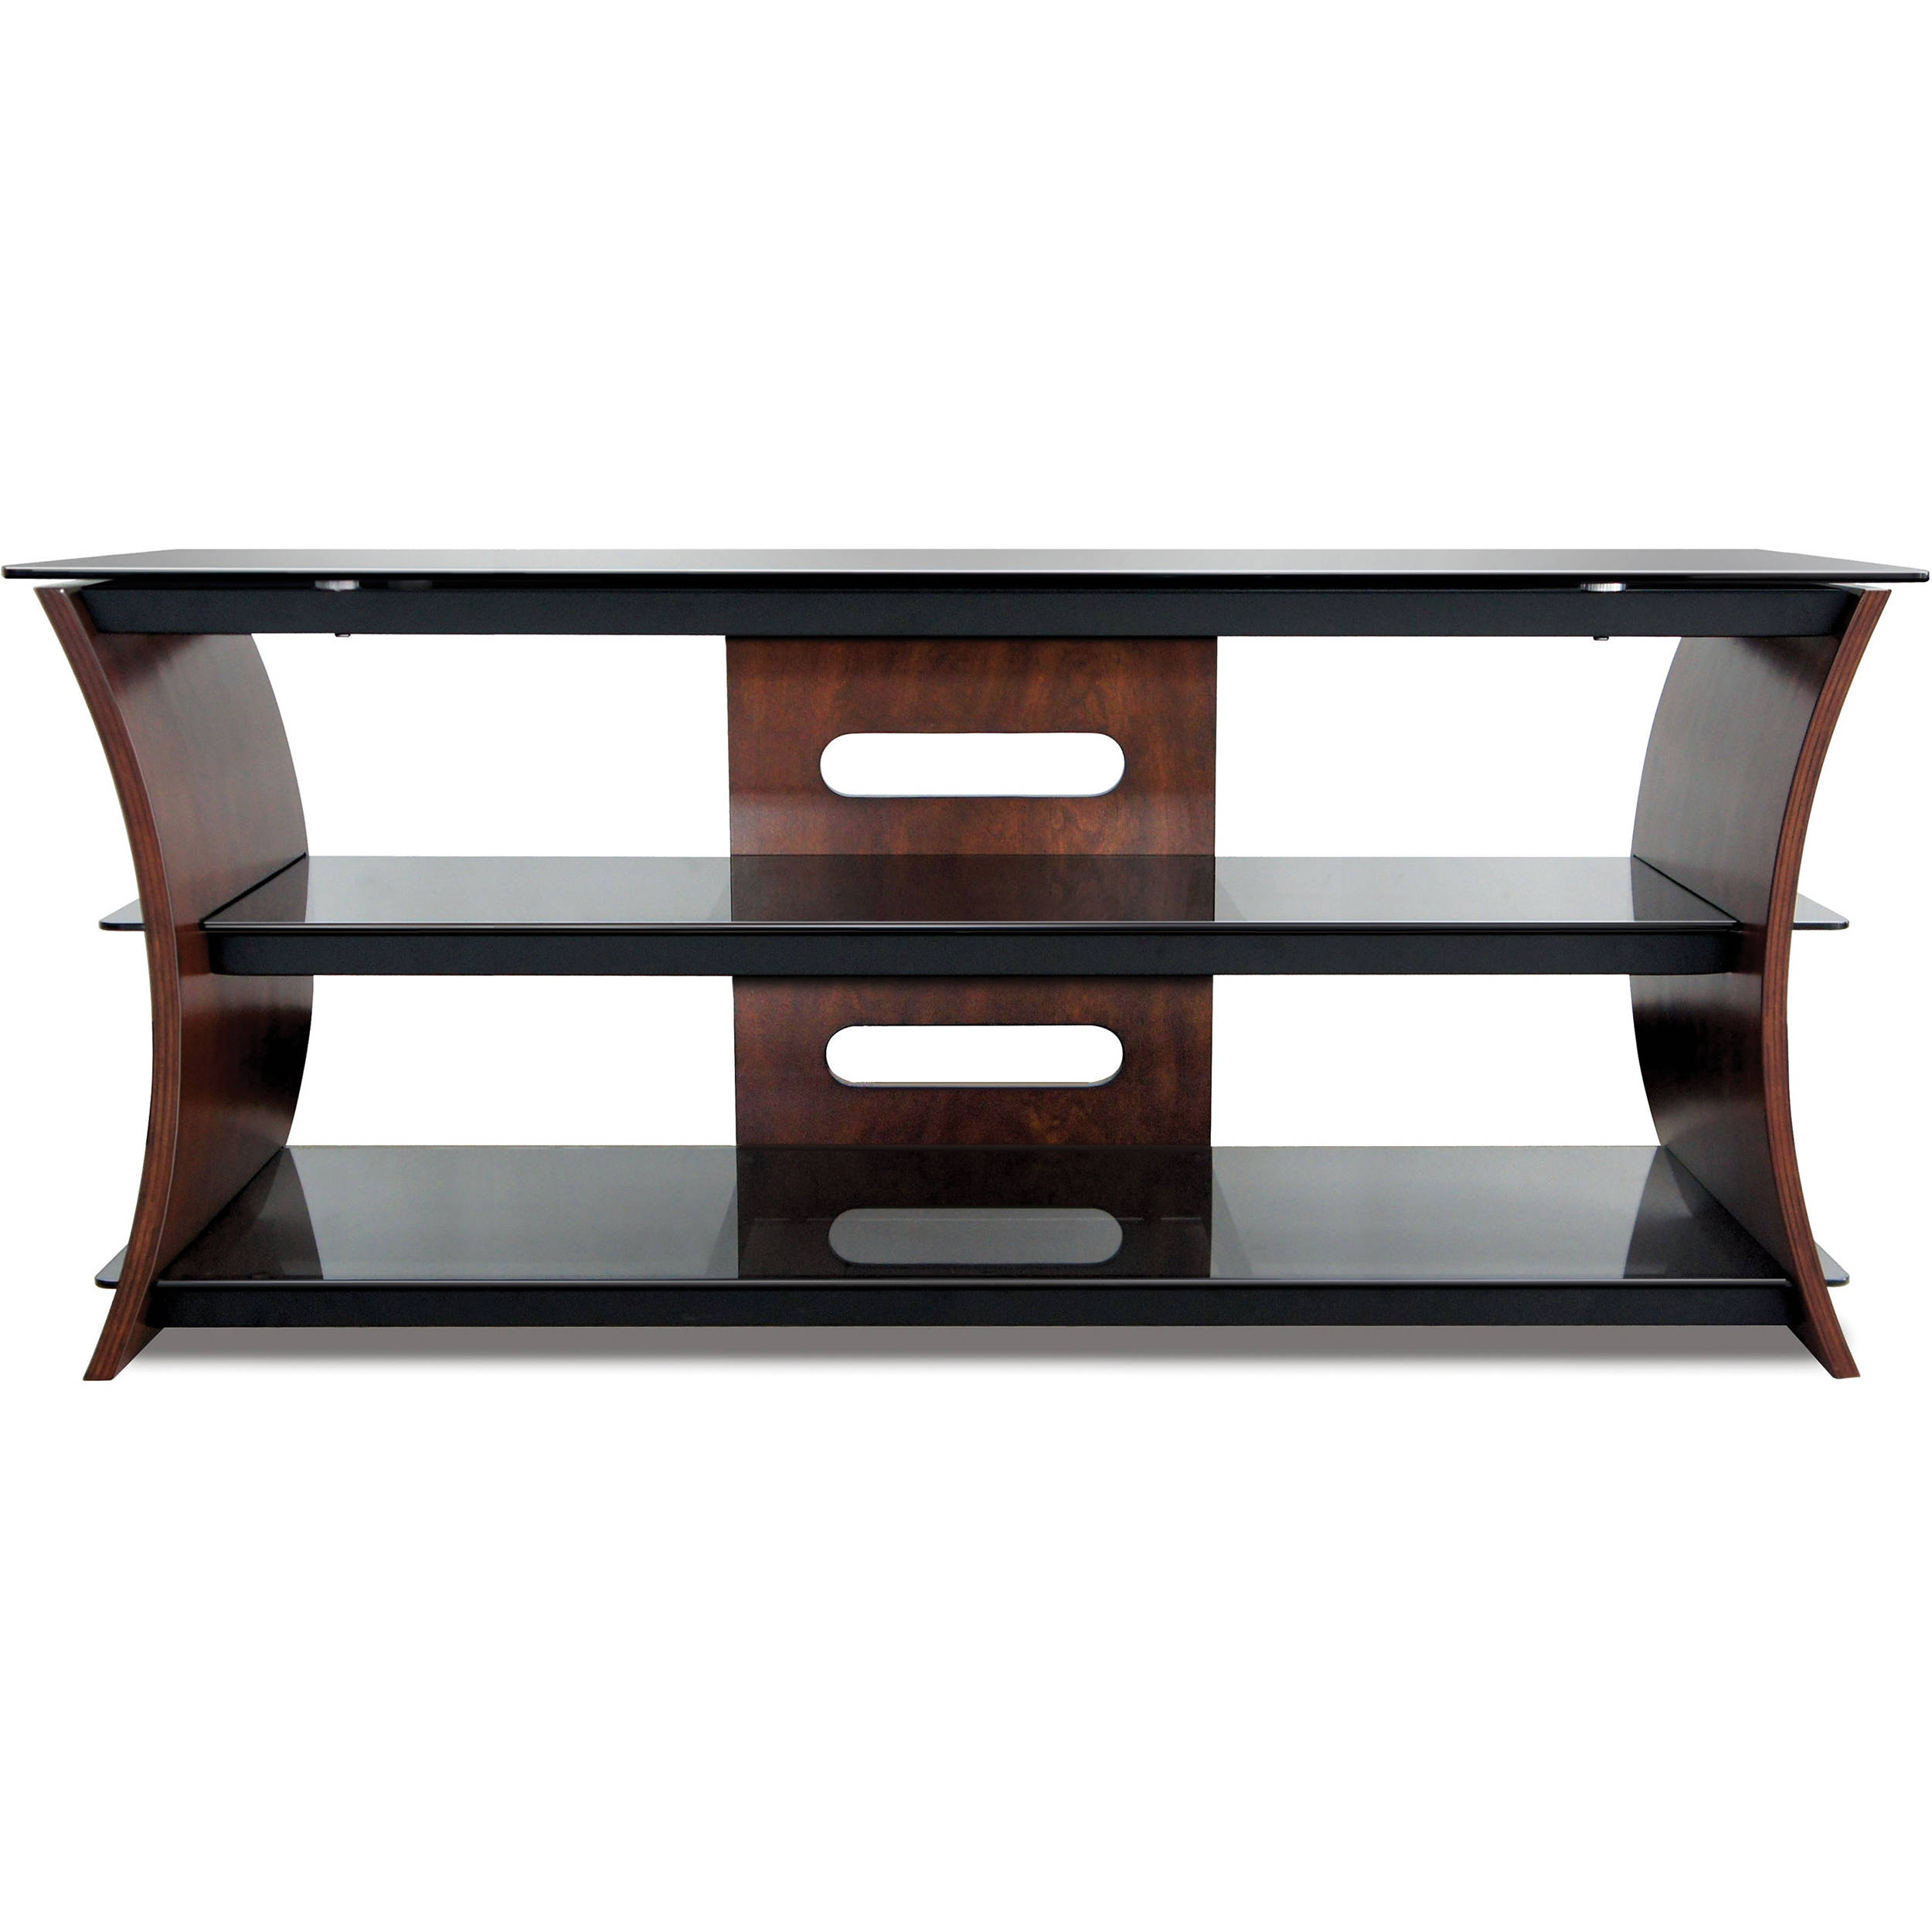 Bell O Cw356 Curved Wood Tv Stand Cw356